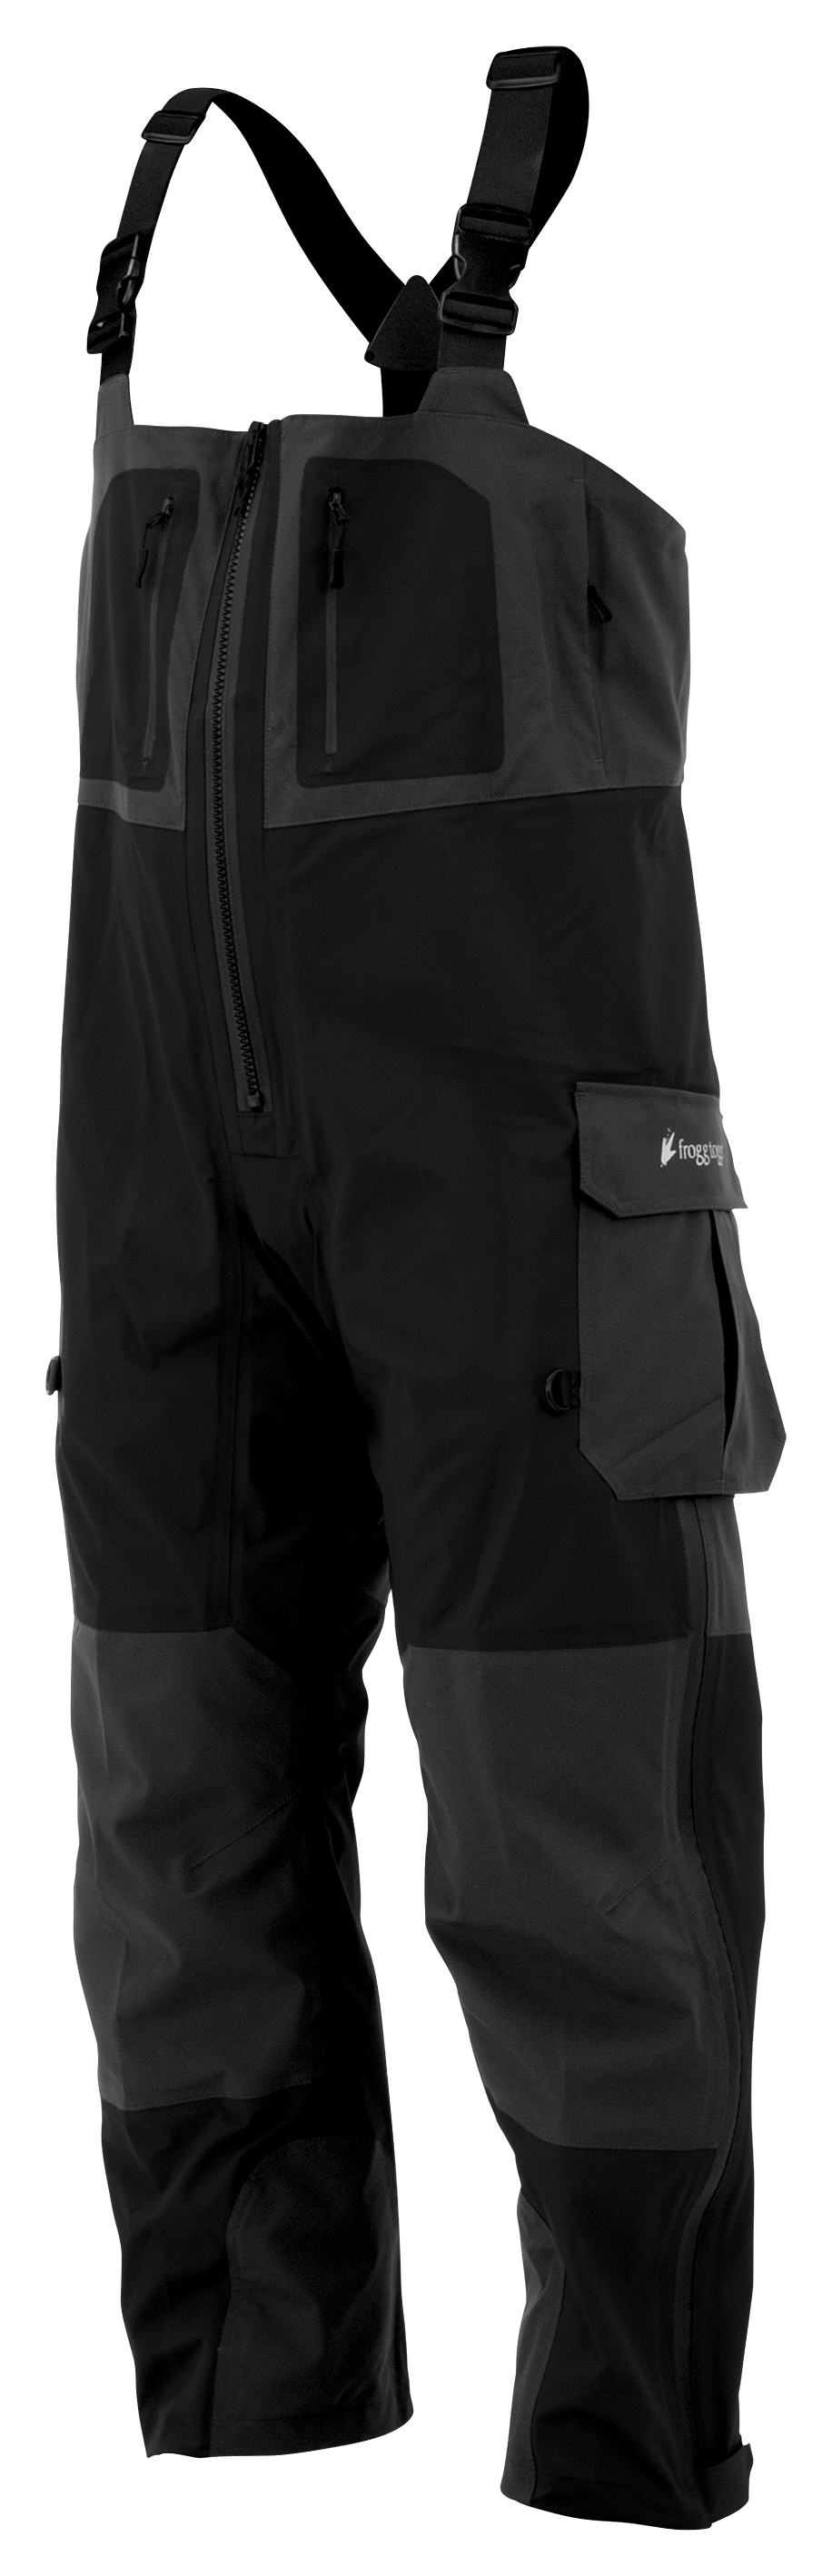 frogg toggs Pilot II Bibs for Men with Co-Pilot Insulated Liner | Cabela's